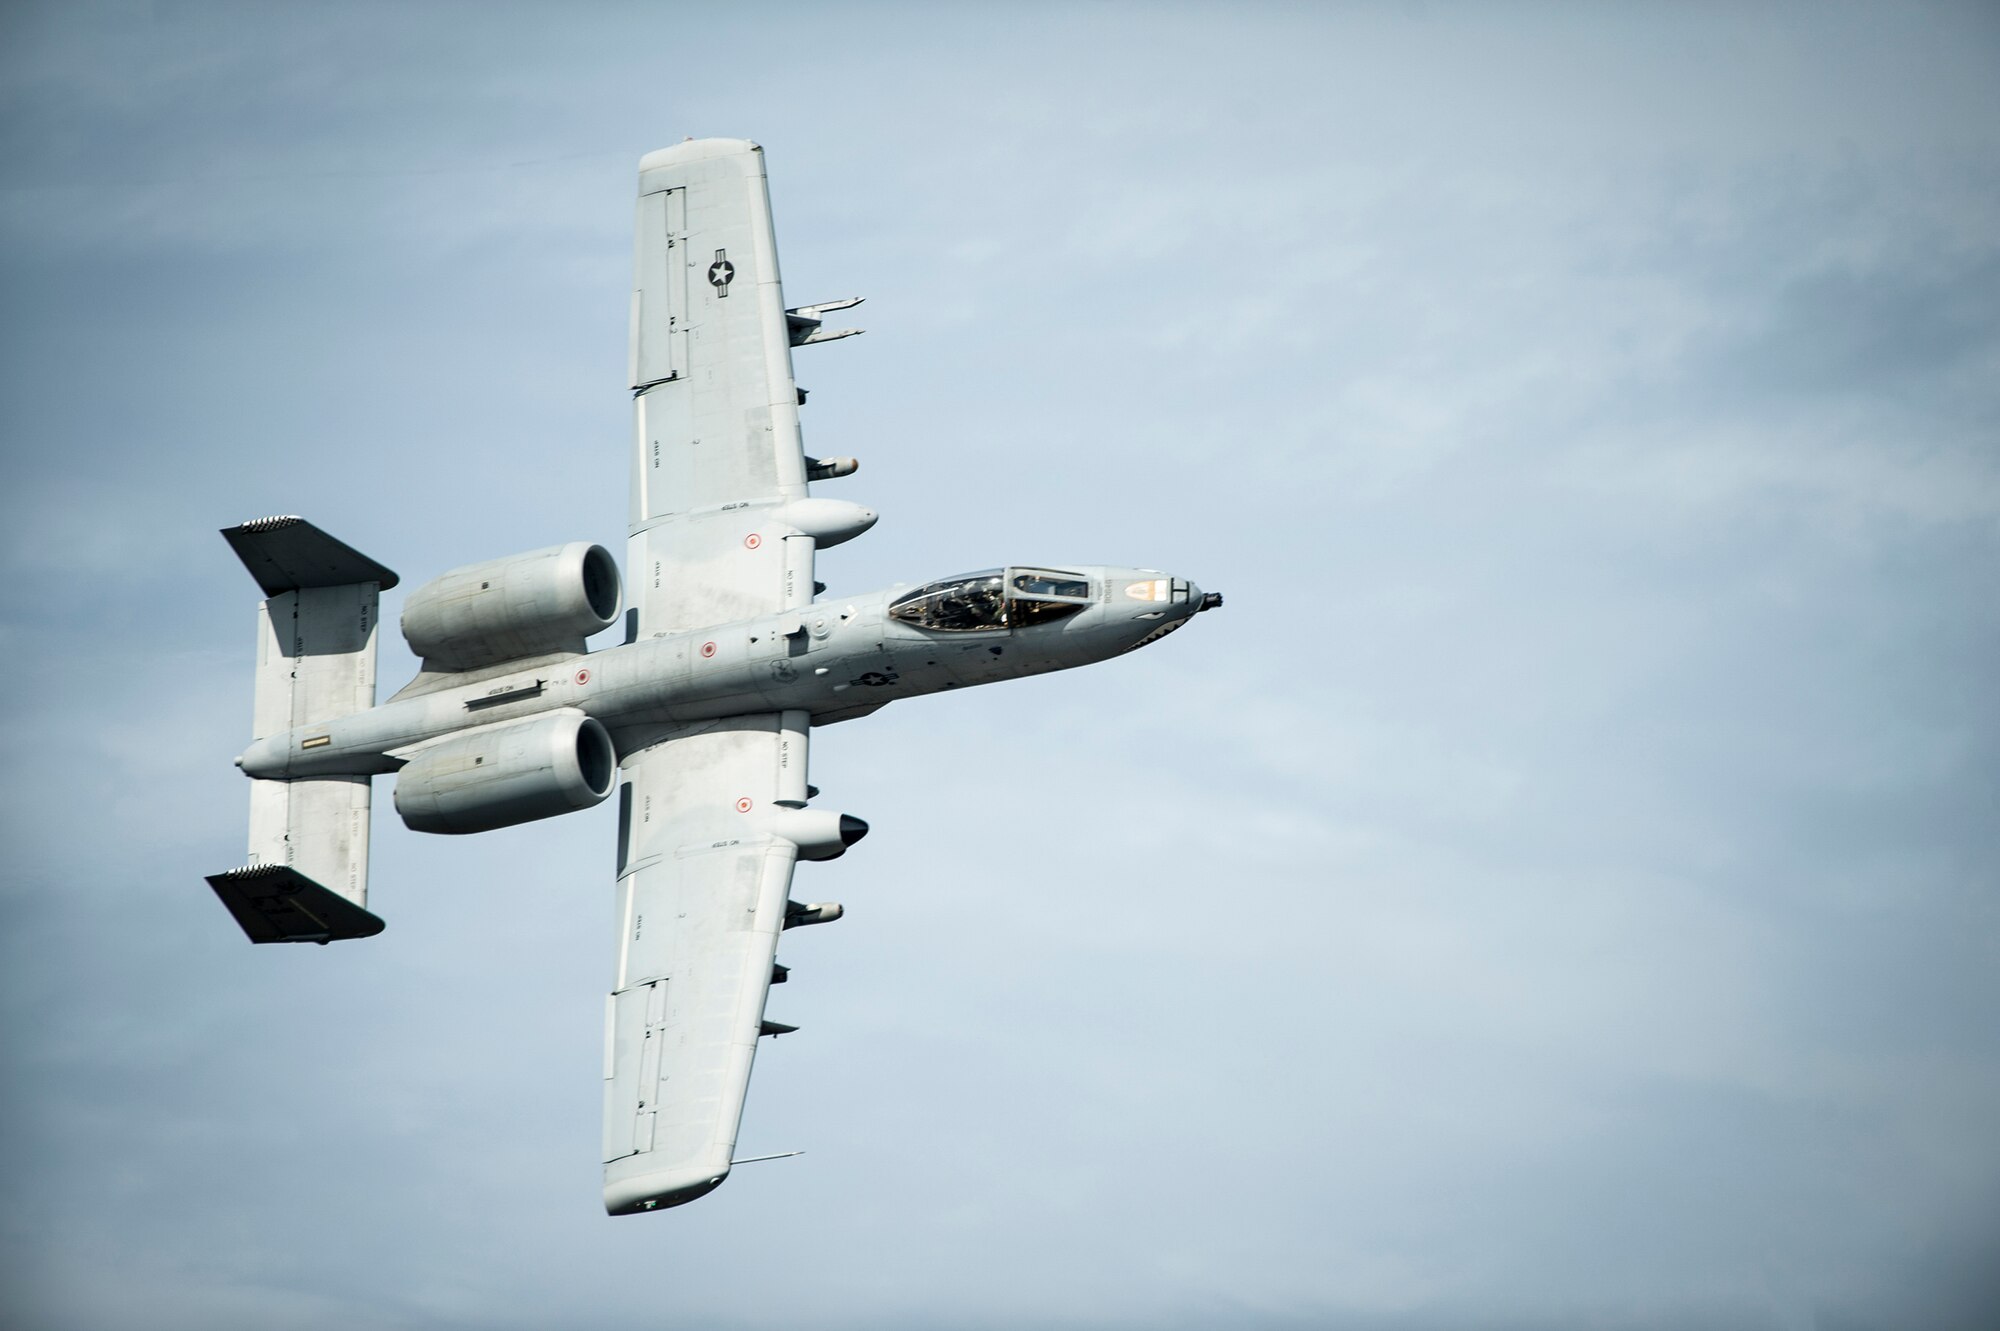 An A-10C Thunderbolt II from the 23rd Fighter Group performs a show-of-force maneuver during a training exercise, Jan. 26, 2016, at Moody Air Force Base, Ga. During the training, the A-10Cs provided close air support for the 41st Rescue Squadron’s HH-60G Pave Hawk helicopters in a simulated combat search and rescue mission (U.S. Air Force photo by Airman 1st Class Lauren Johnson)